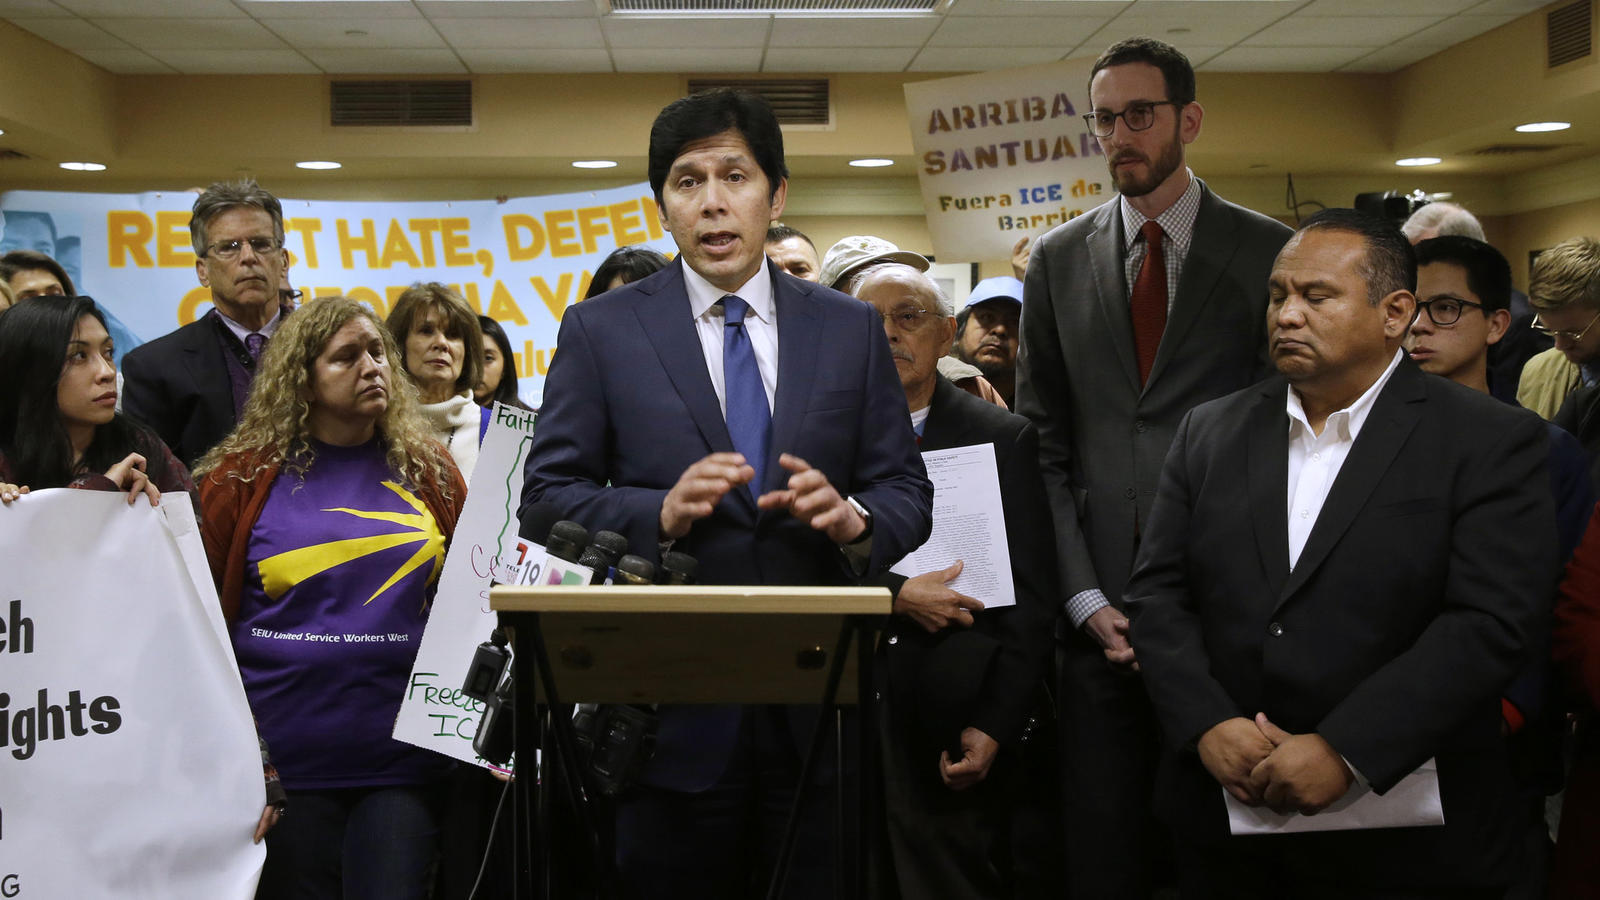 State Senate President Pro Tem Kevin de León discusses legislation that would prevent state and local law enforcement agencies from using resources for immigration enforcement.